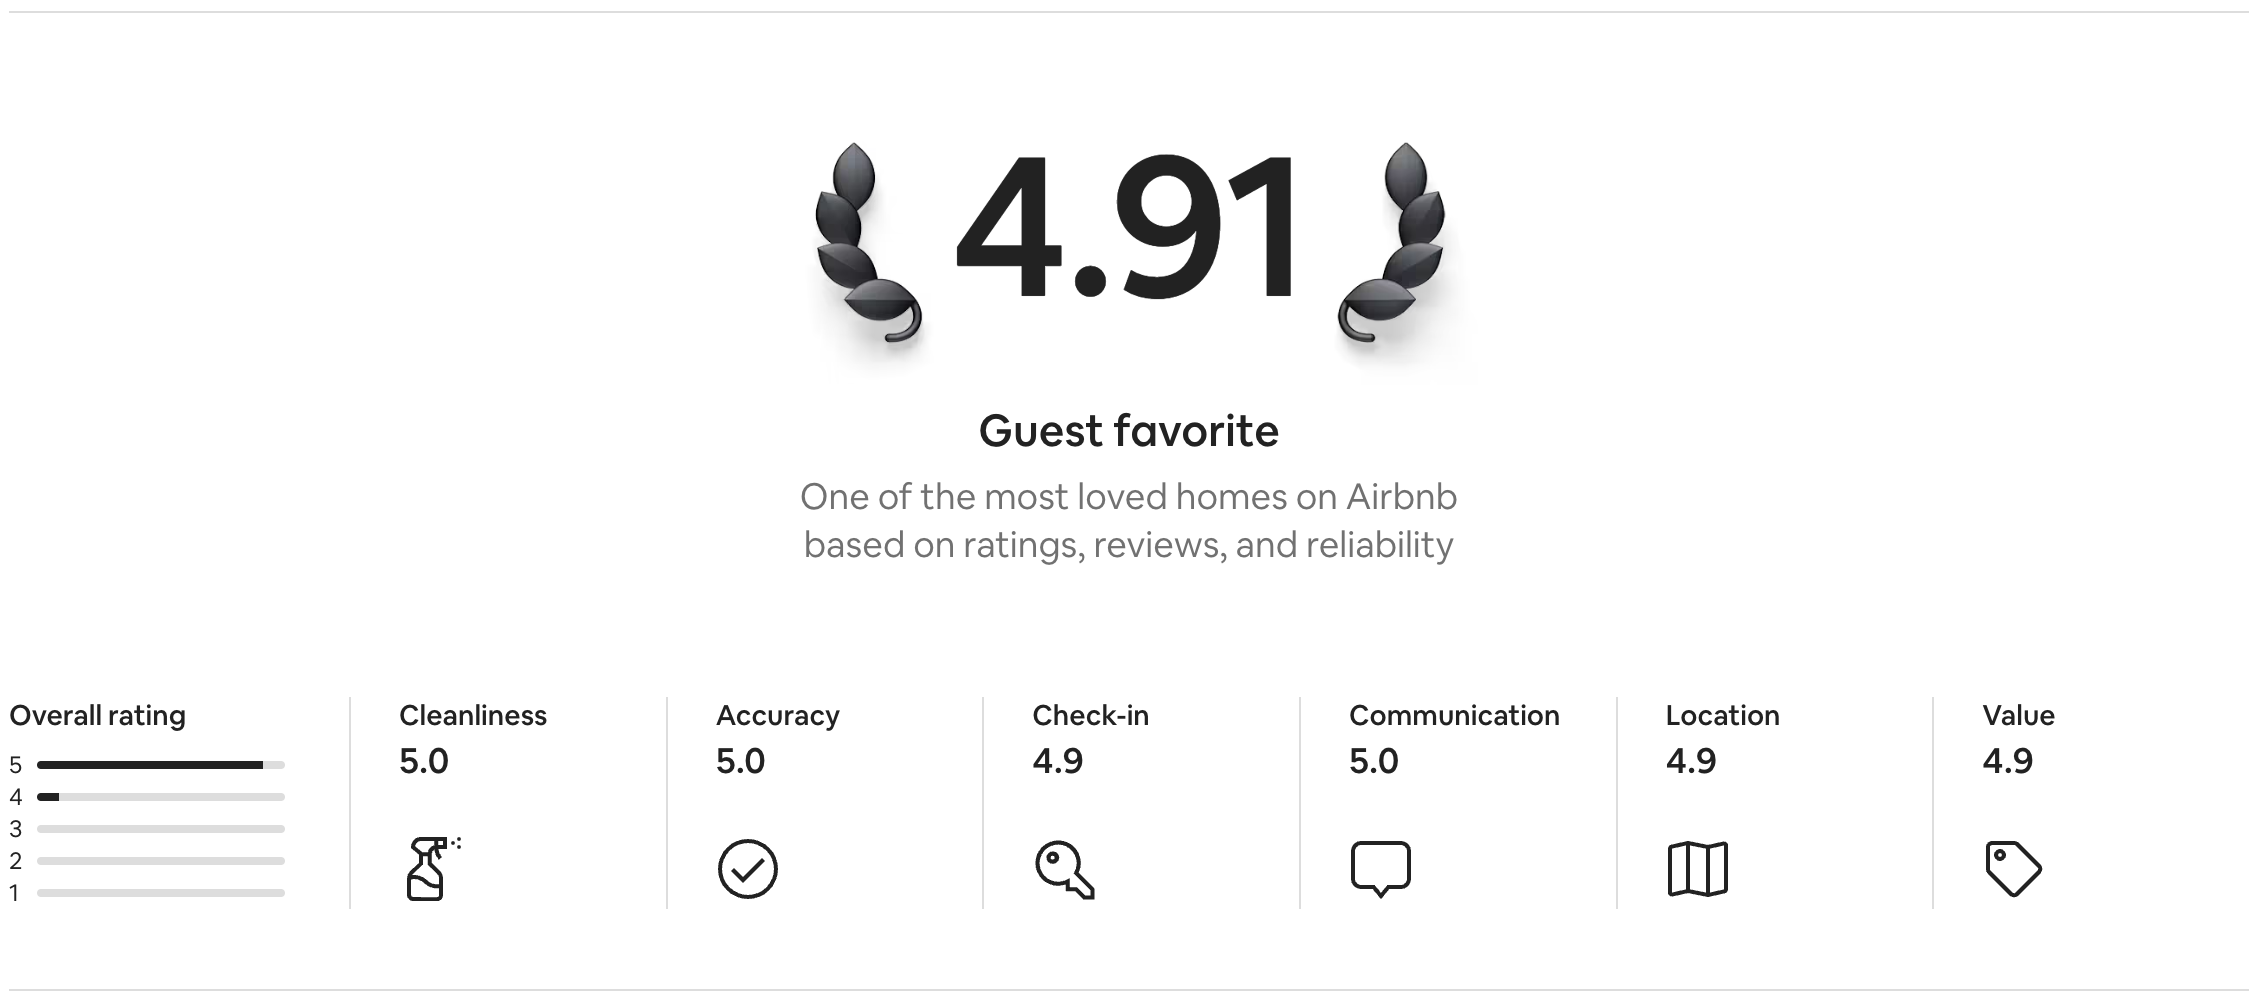 Guest favorite per AirBNB - One of the most loved homes on Airbnb based on ratings, reviews, and reliability. 4.91 rating based on 68 plus reviews.